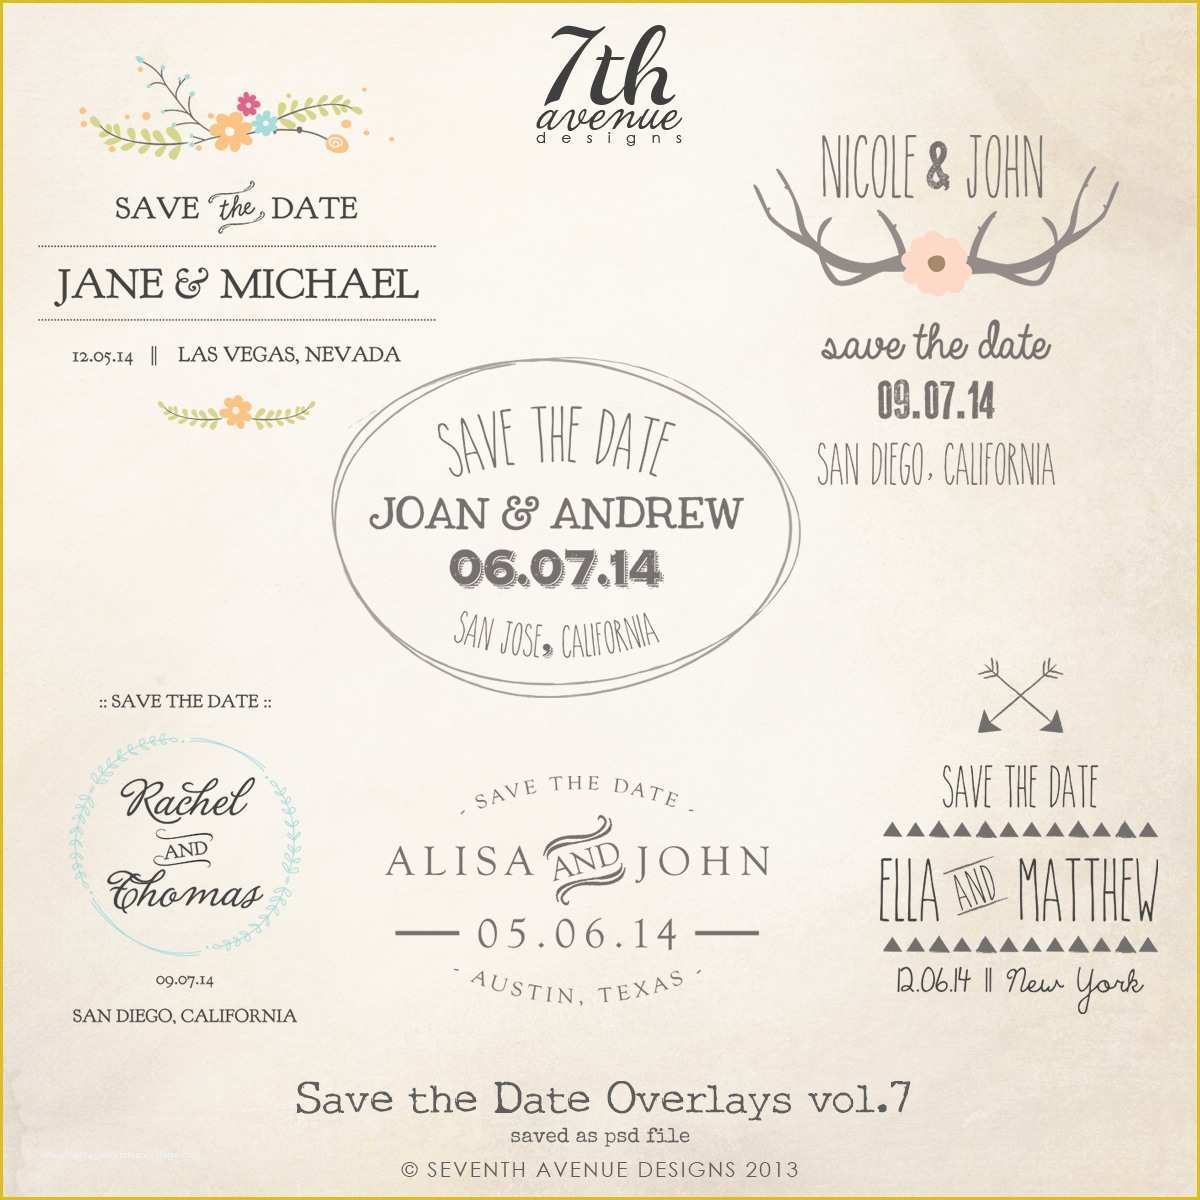 Free Save the Date Templates for Word Of Save the Date Word Overlays Vol 7 [overlays Savethedate7